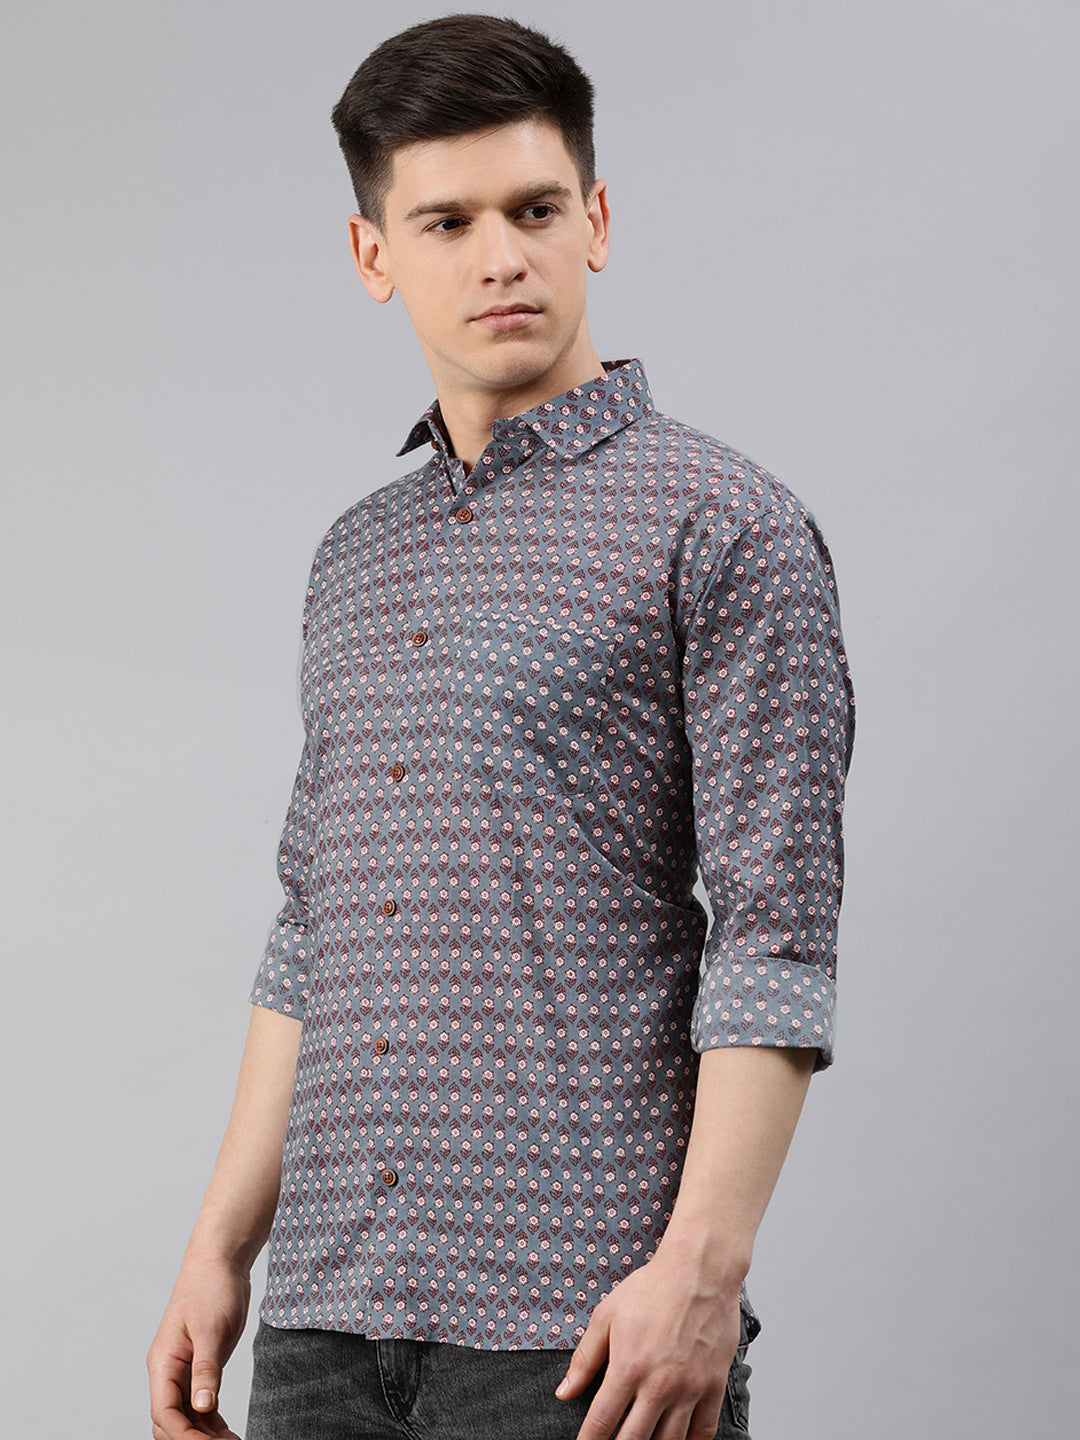 Gray Cotton Full Sleeves Shirts For Men